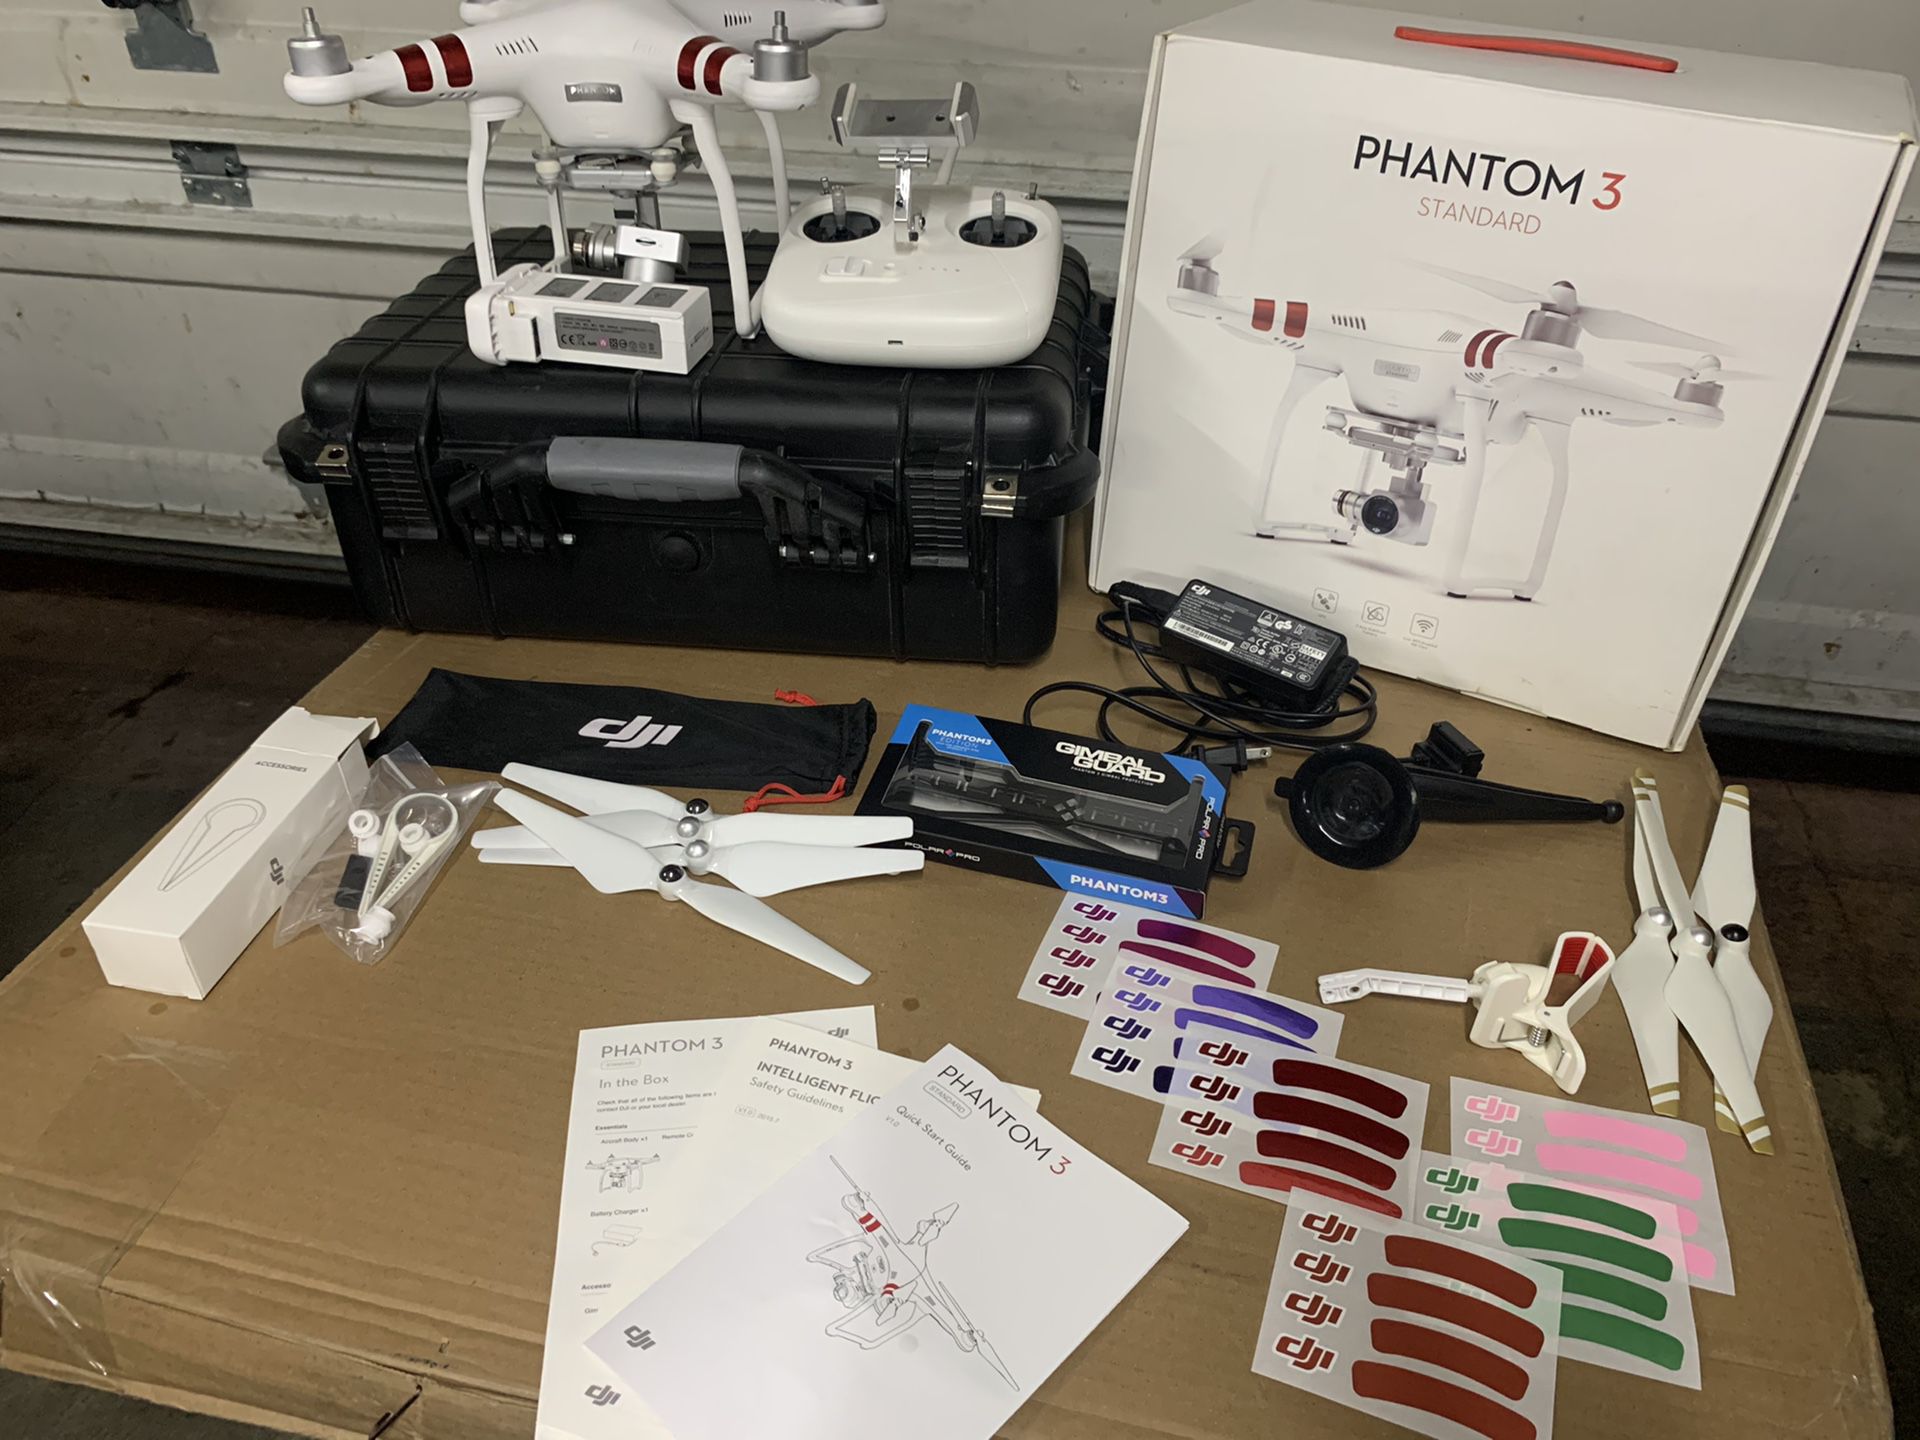 DJI Phantom 3 Standard drone package with waterproof case and extra accessories